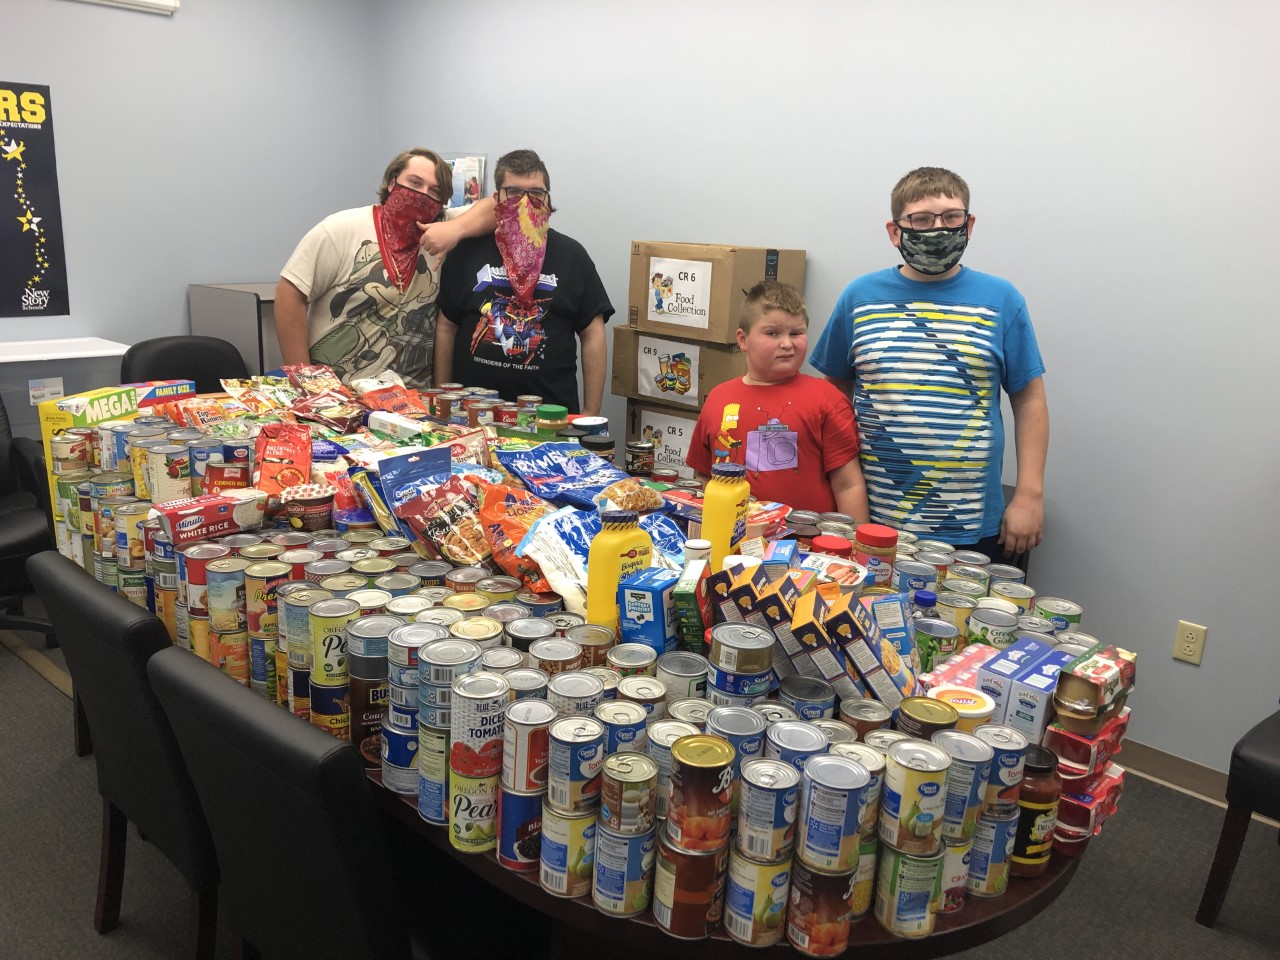 New Story Schools Wraps Up Company Food Drive